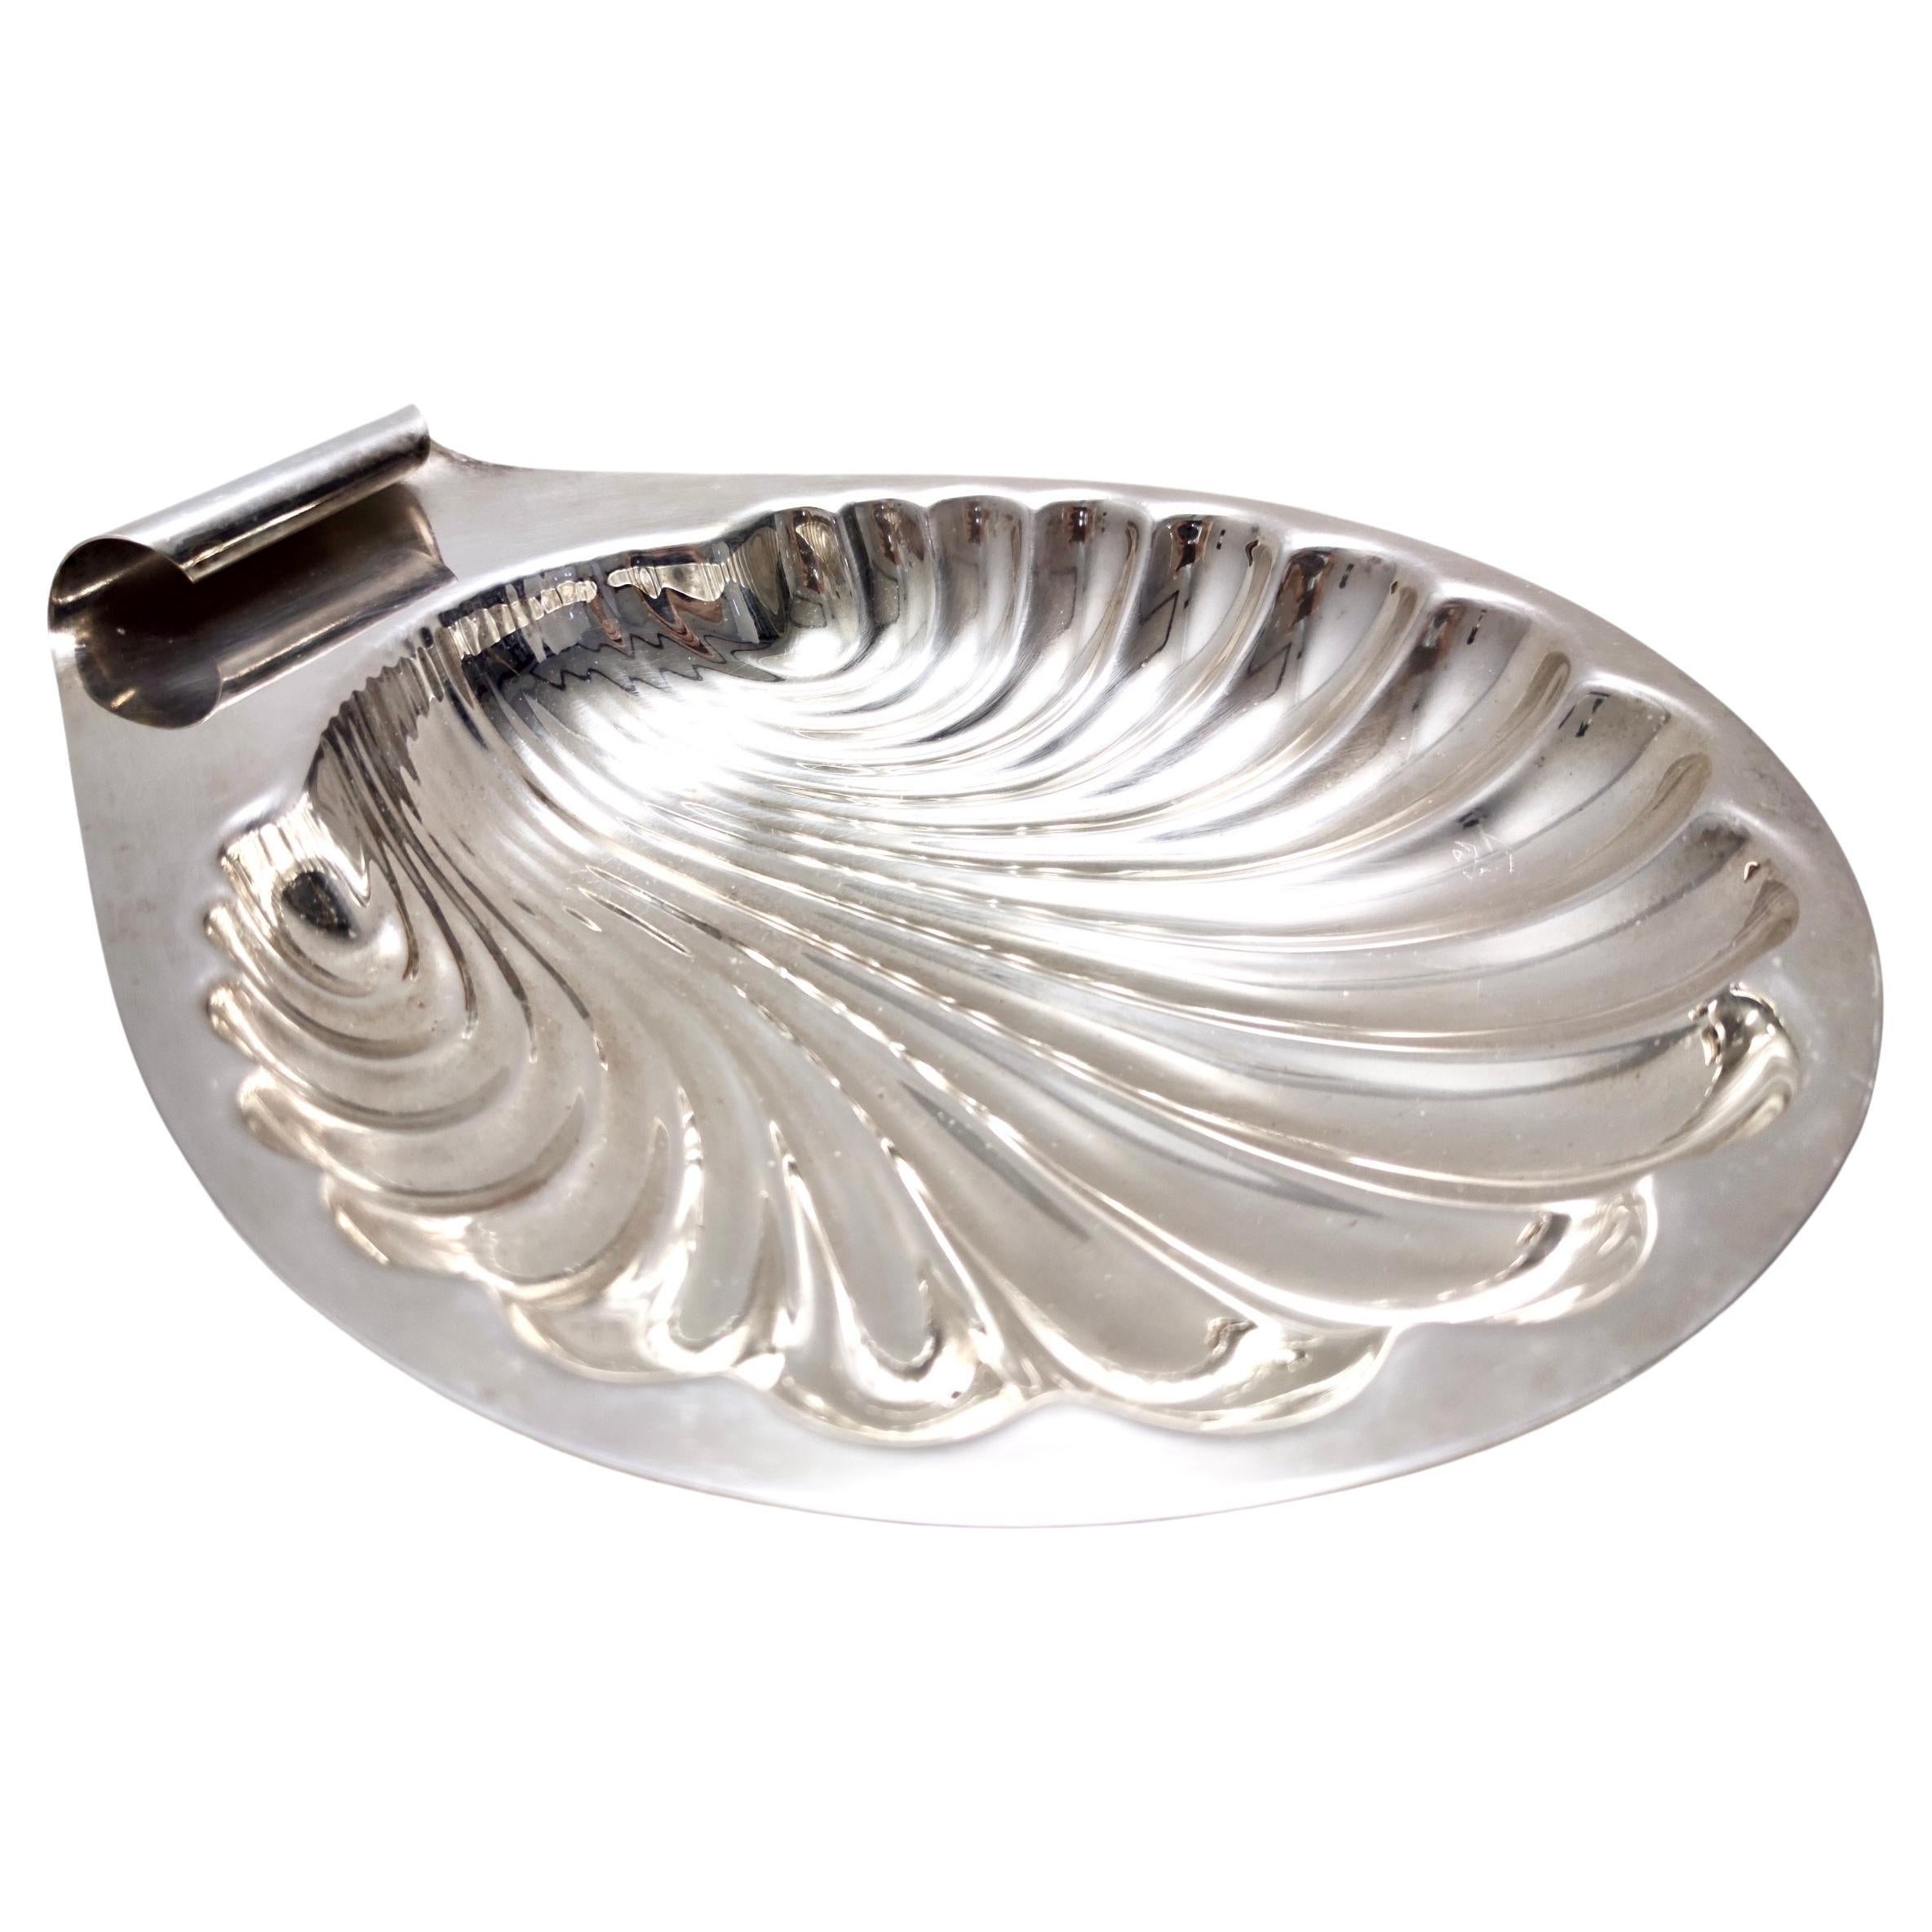 Postmodern Lino Sabattini Silver-Plated Brass Shell Vide-Poche, Italy For Sale